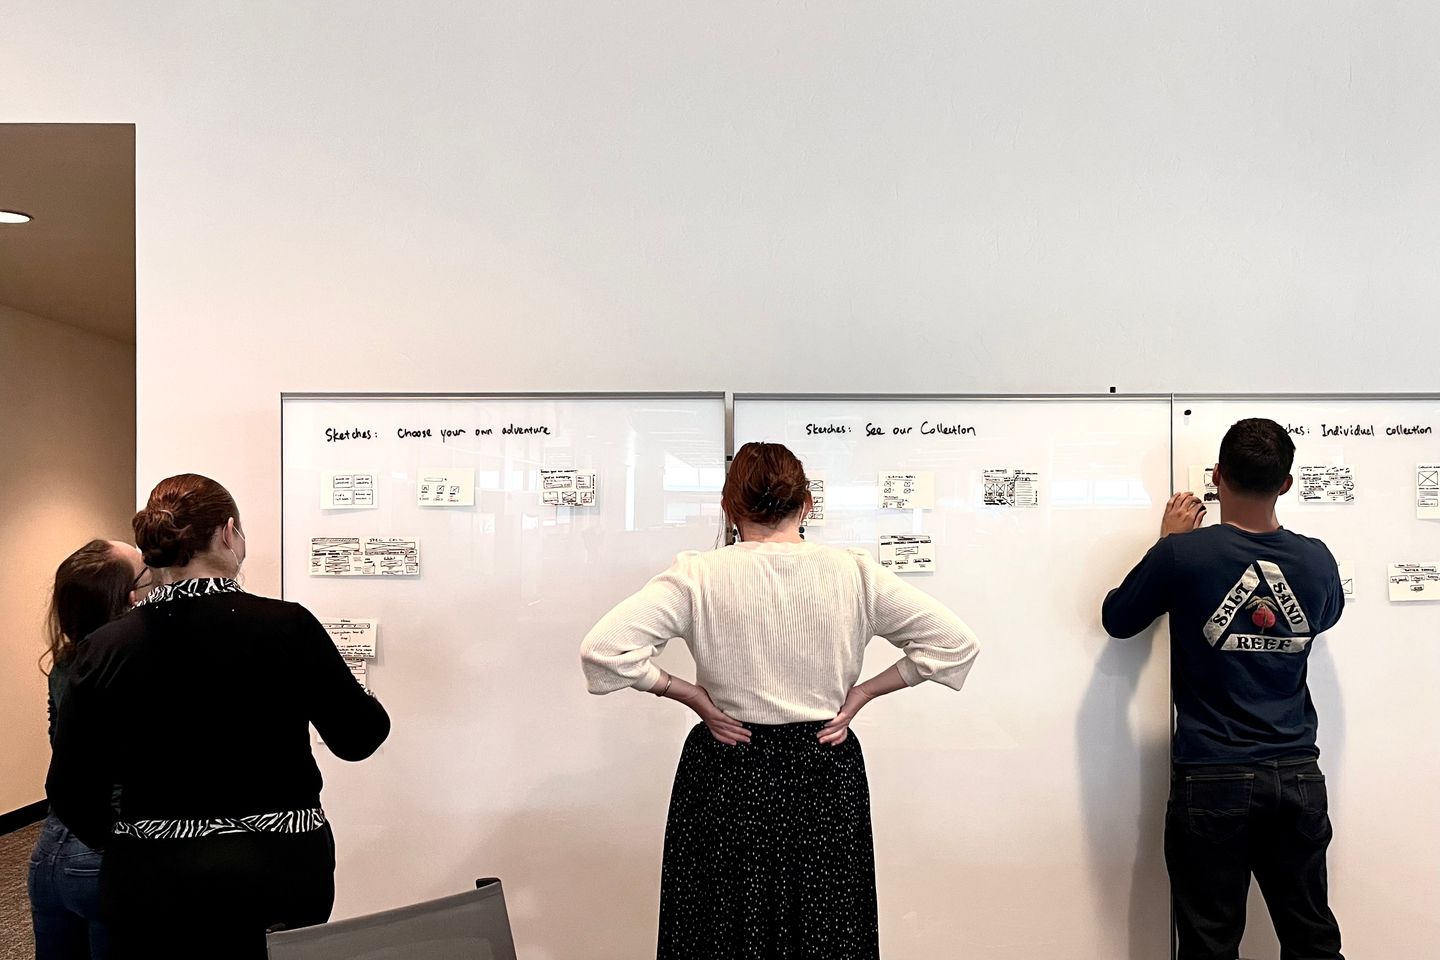 Four people standing in front of whiteboards that have sketches on them